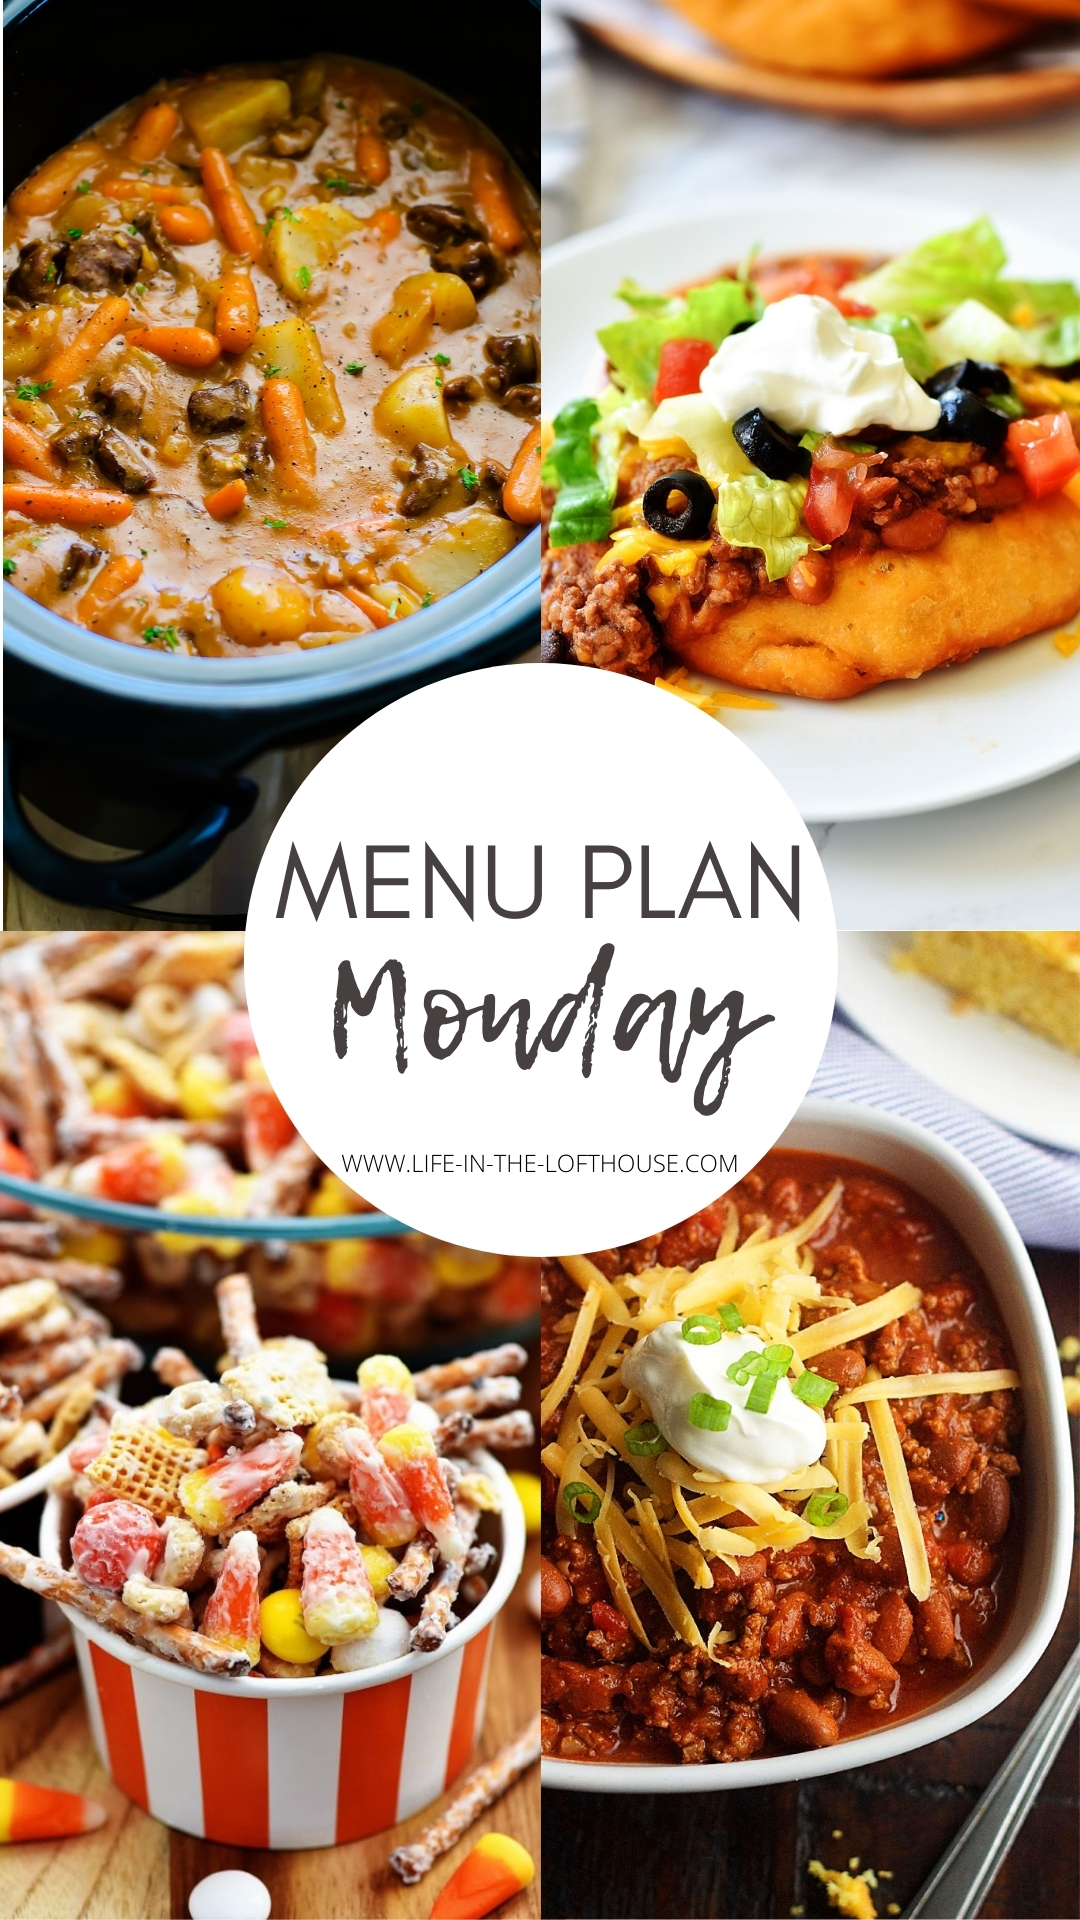 Menu Plan Monday is a weekly menu with delicious dinner recipes. All of the recipes are easy to follow and great for busy weeknights.